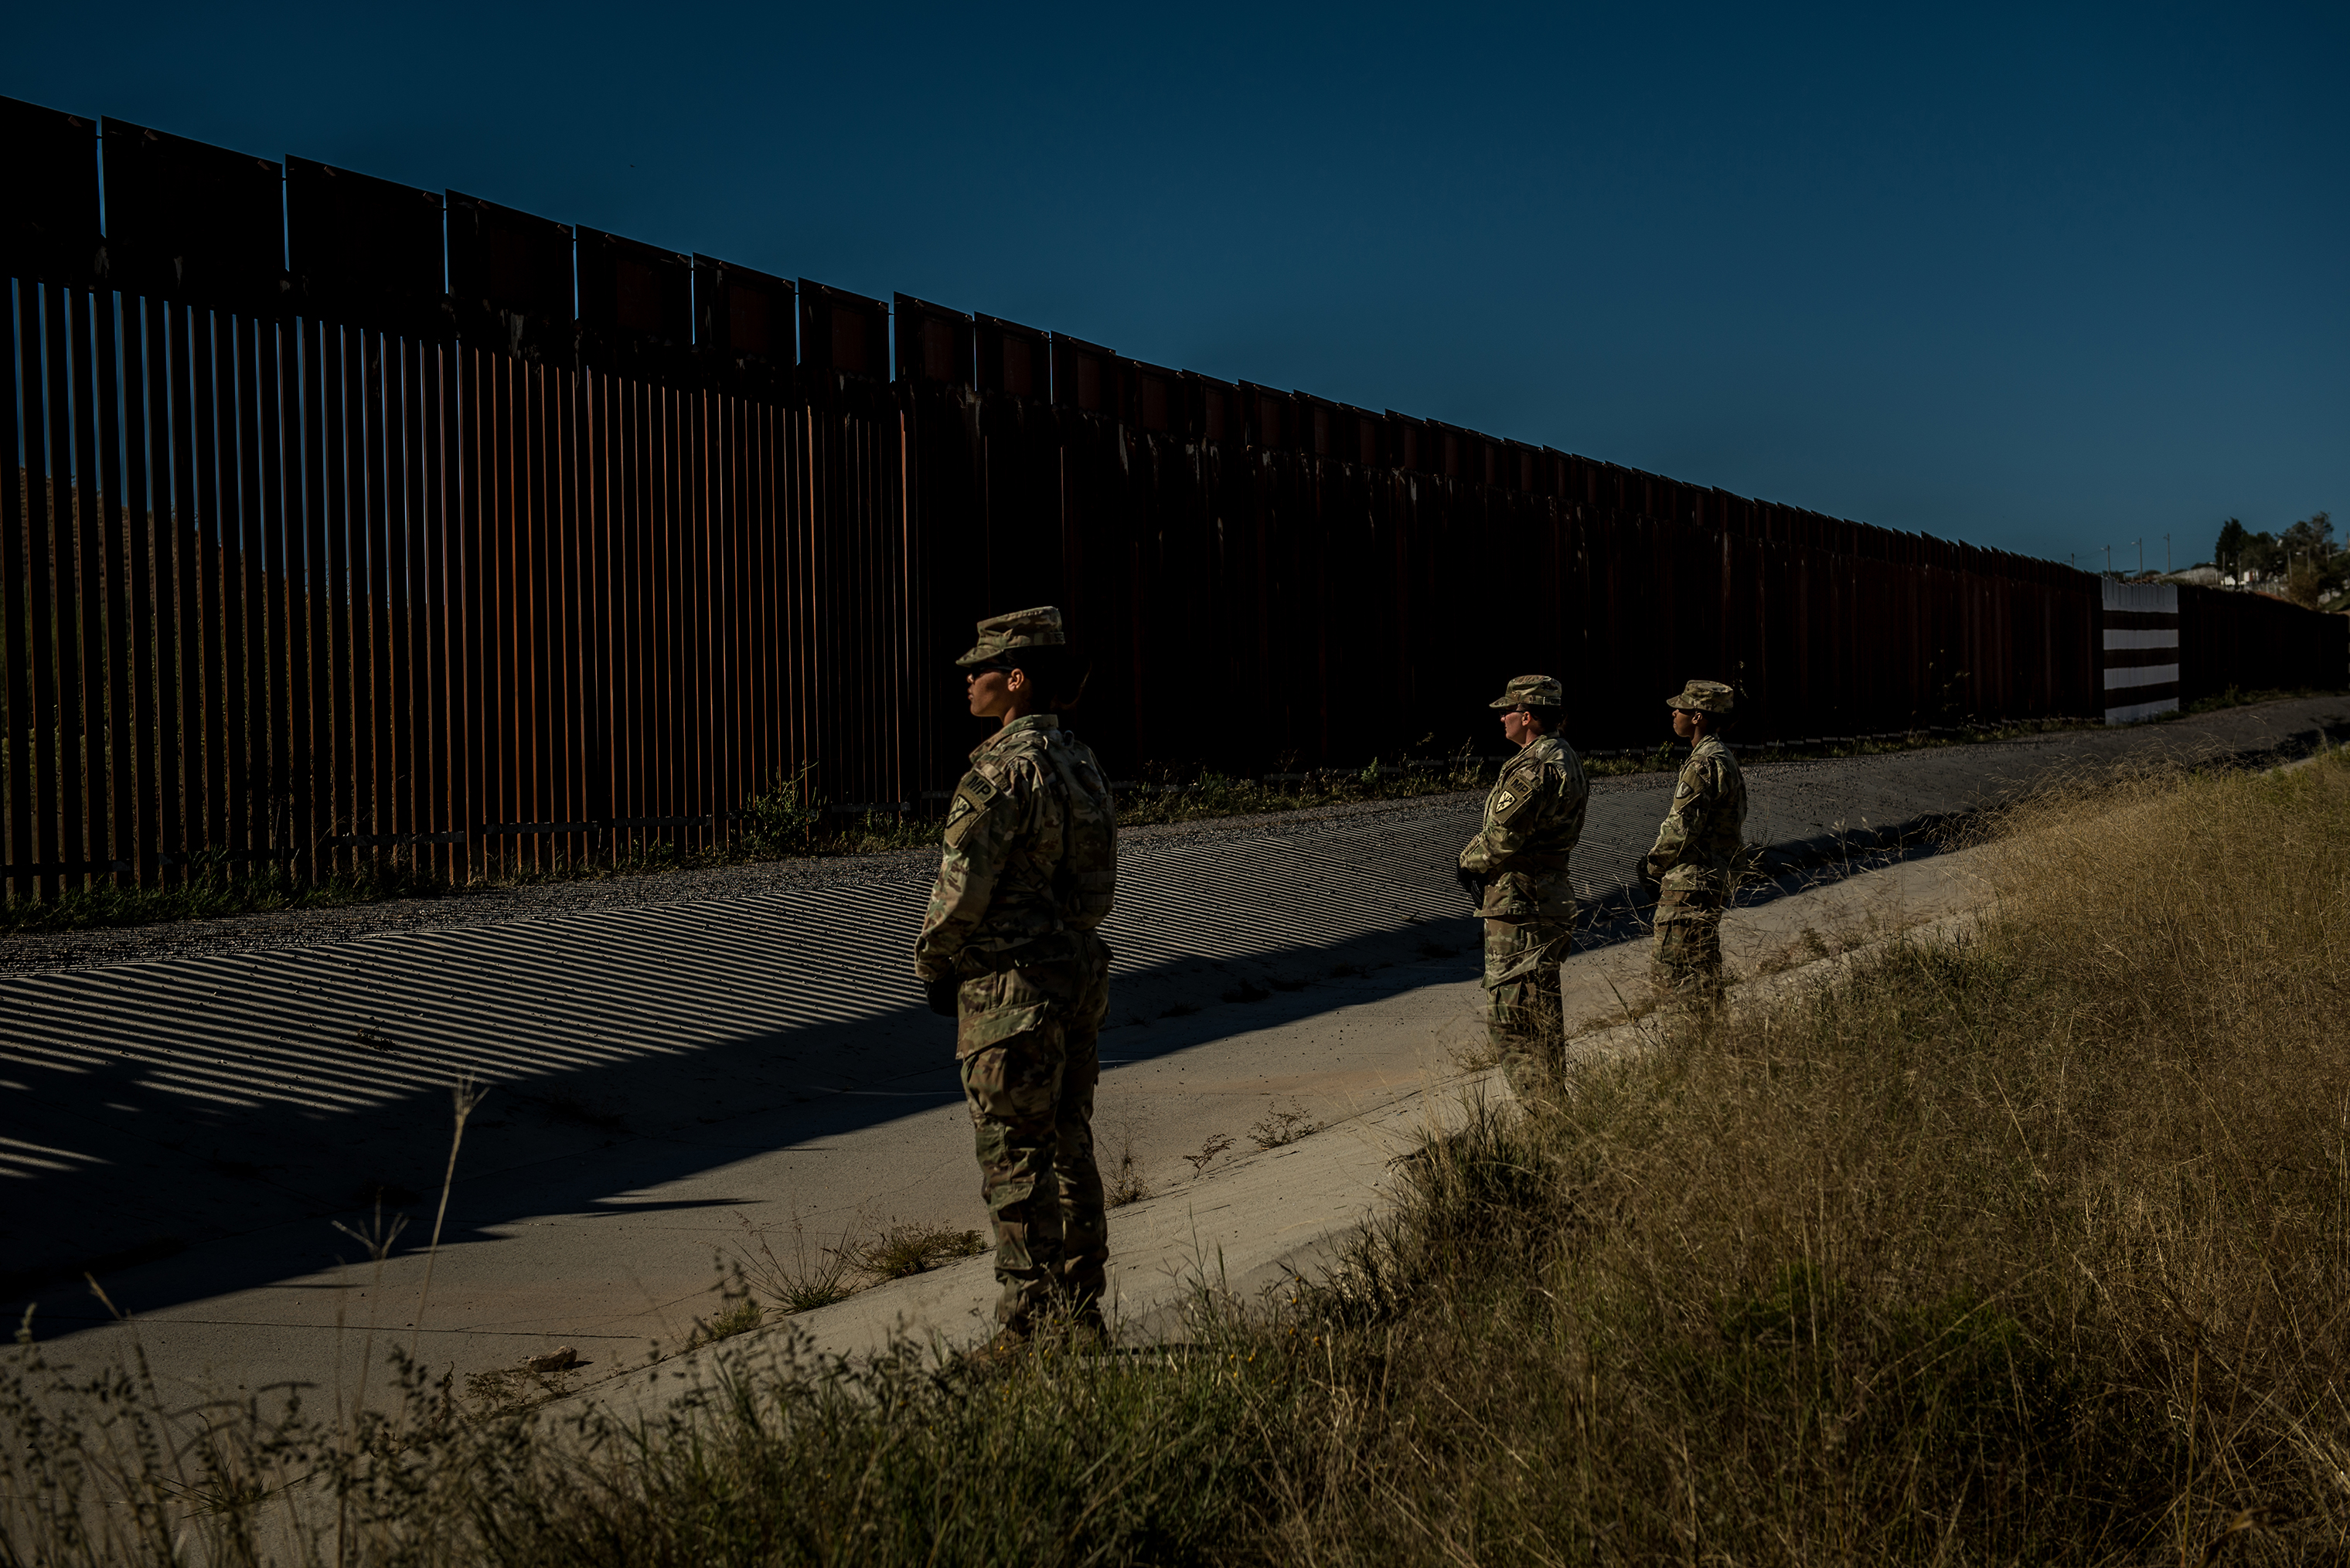 Soldiers of the 104th Engineer Construction Company stand guard as other members of their unit work to heighten security of the border wall. (Meridith Kohut for TIME)